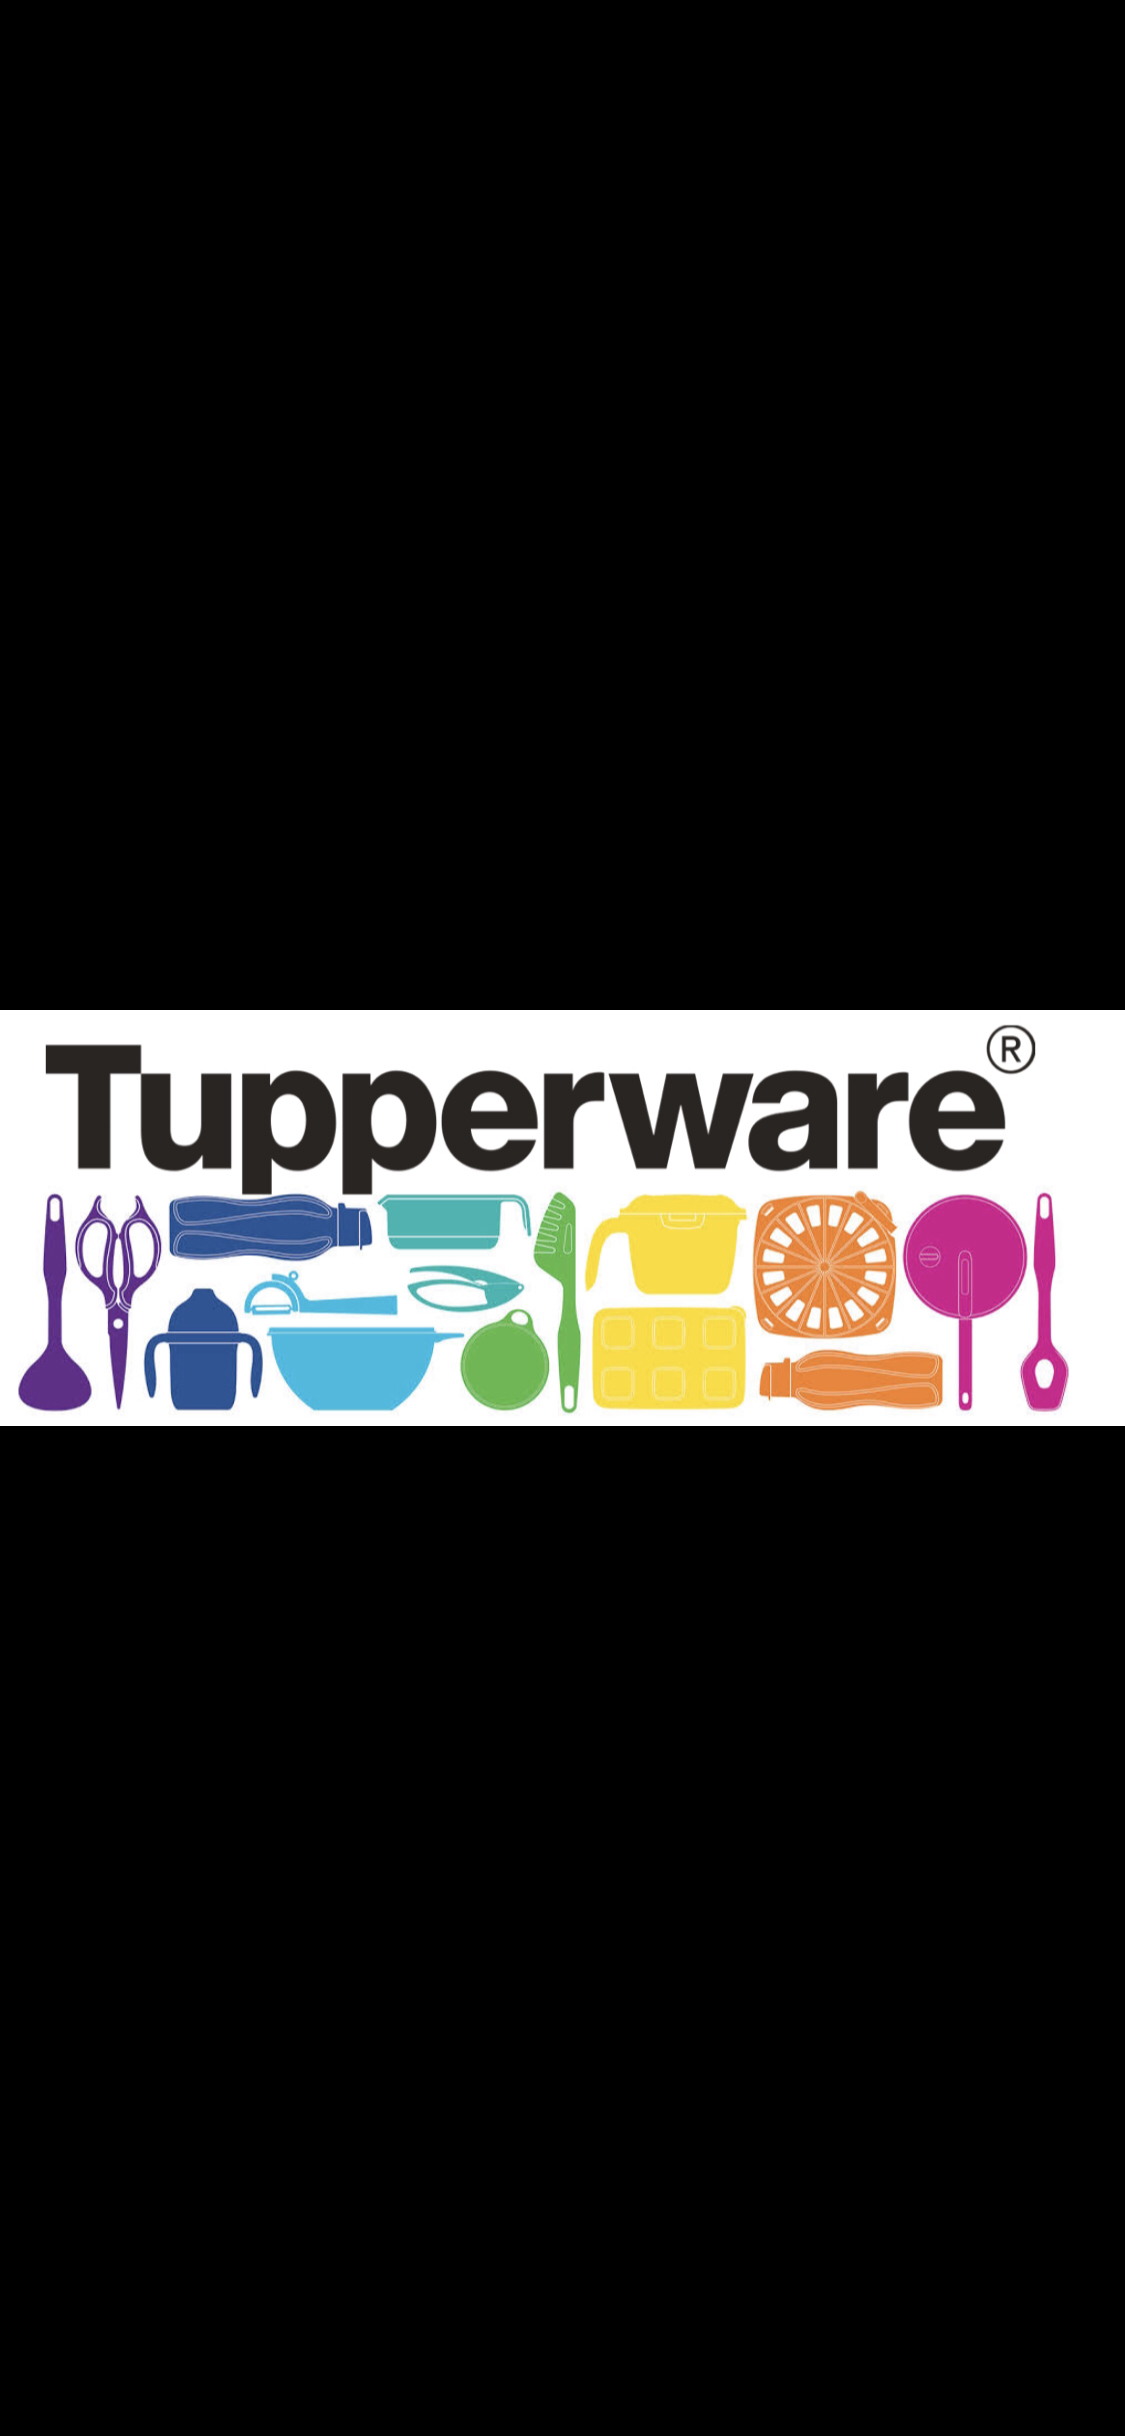 Tupperware in April- on all you missed. Live & freebies - 14 APR